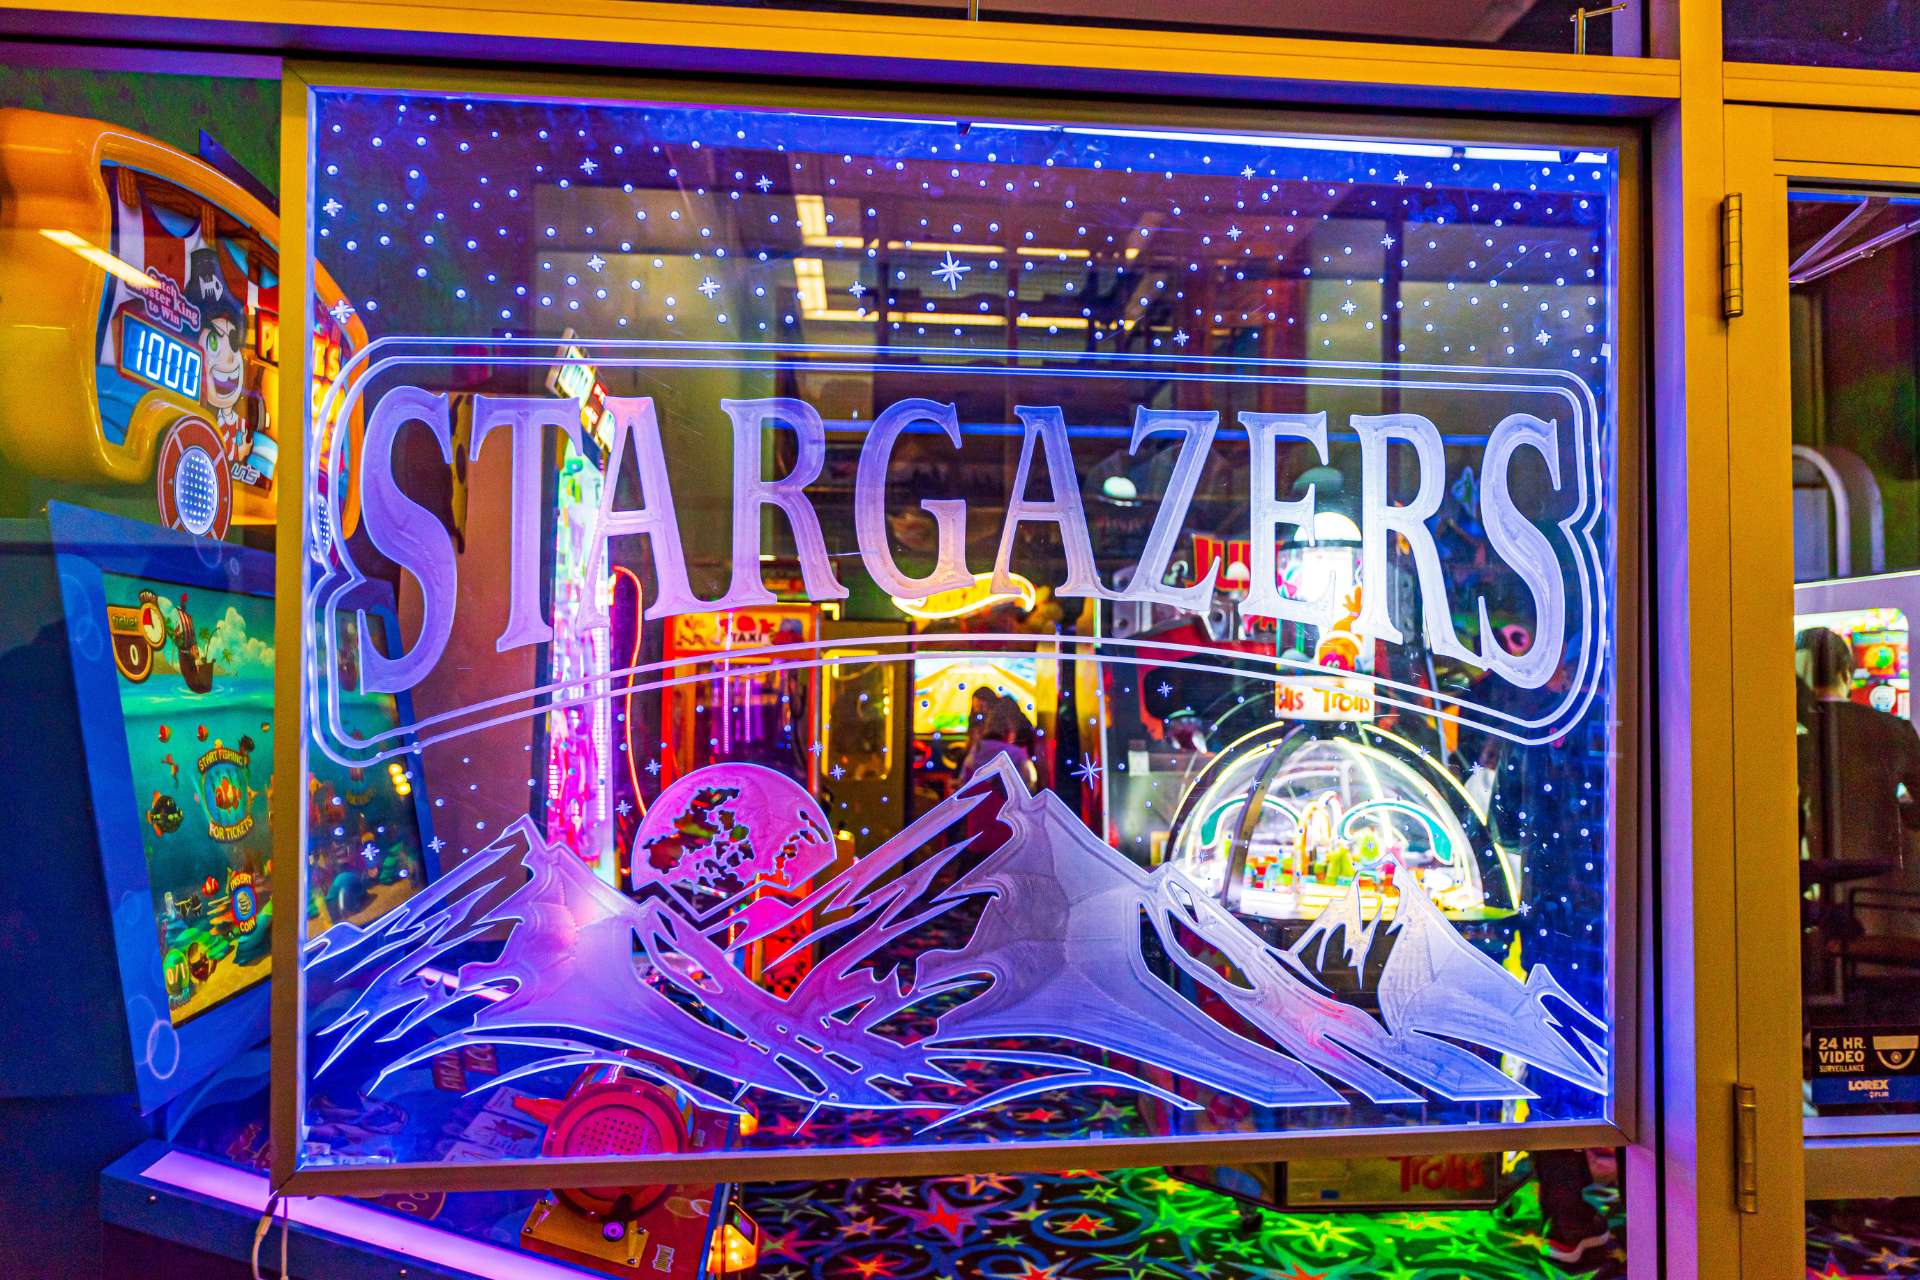 A window sign for Stargazers Arcade